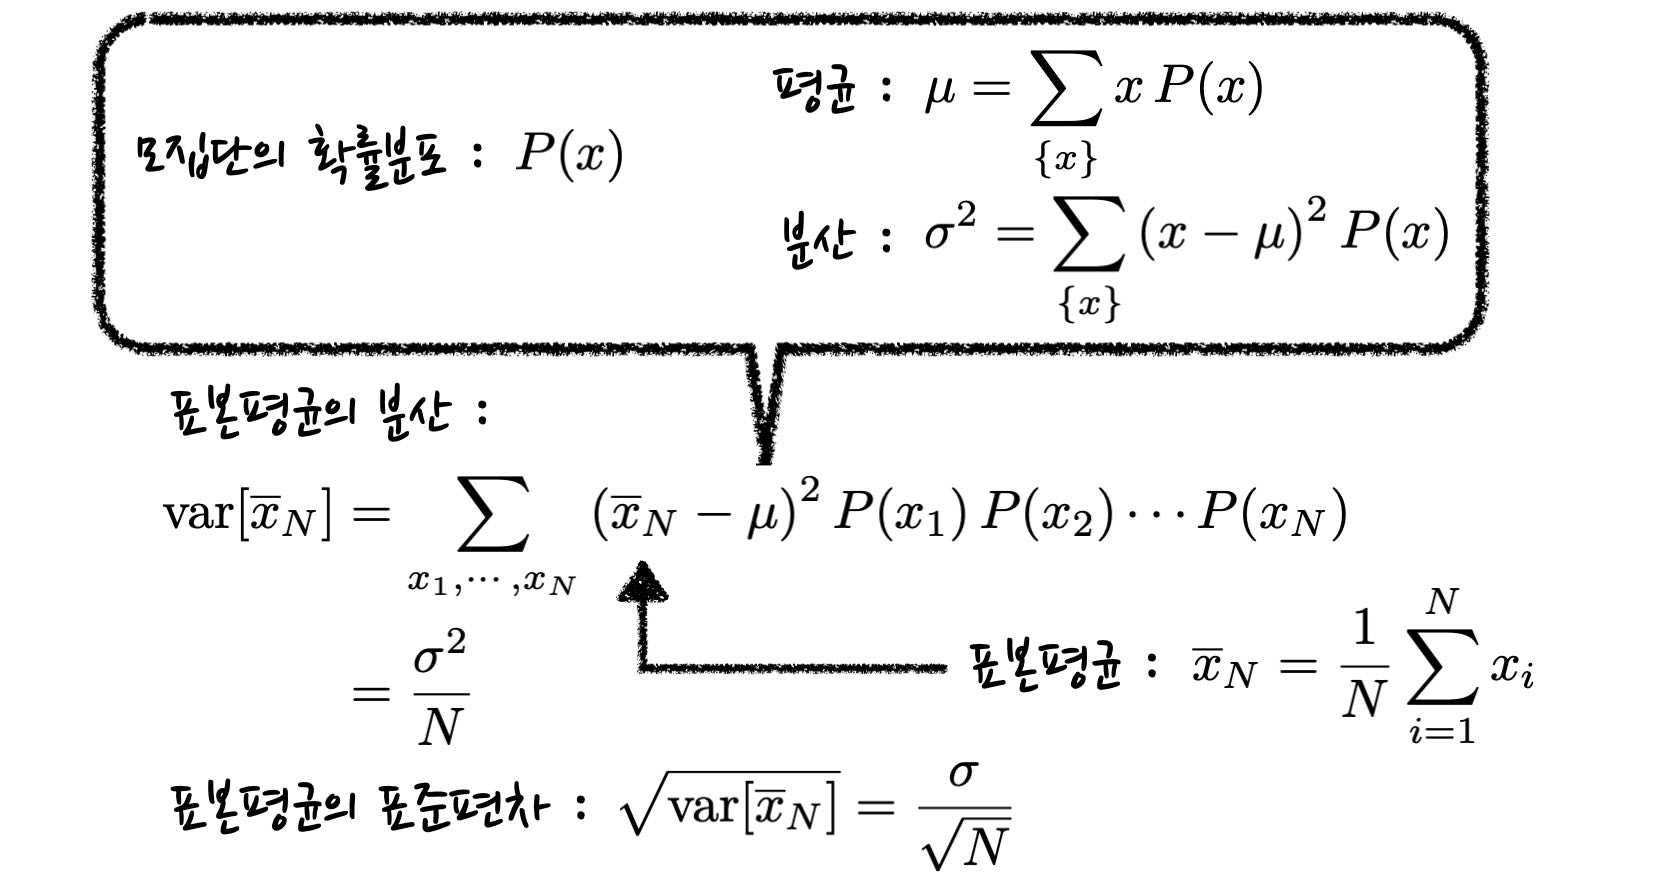 formulae for the variance and standard deviation of the sample mean, written in terms of mean and variance of the underlying probability distribution